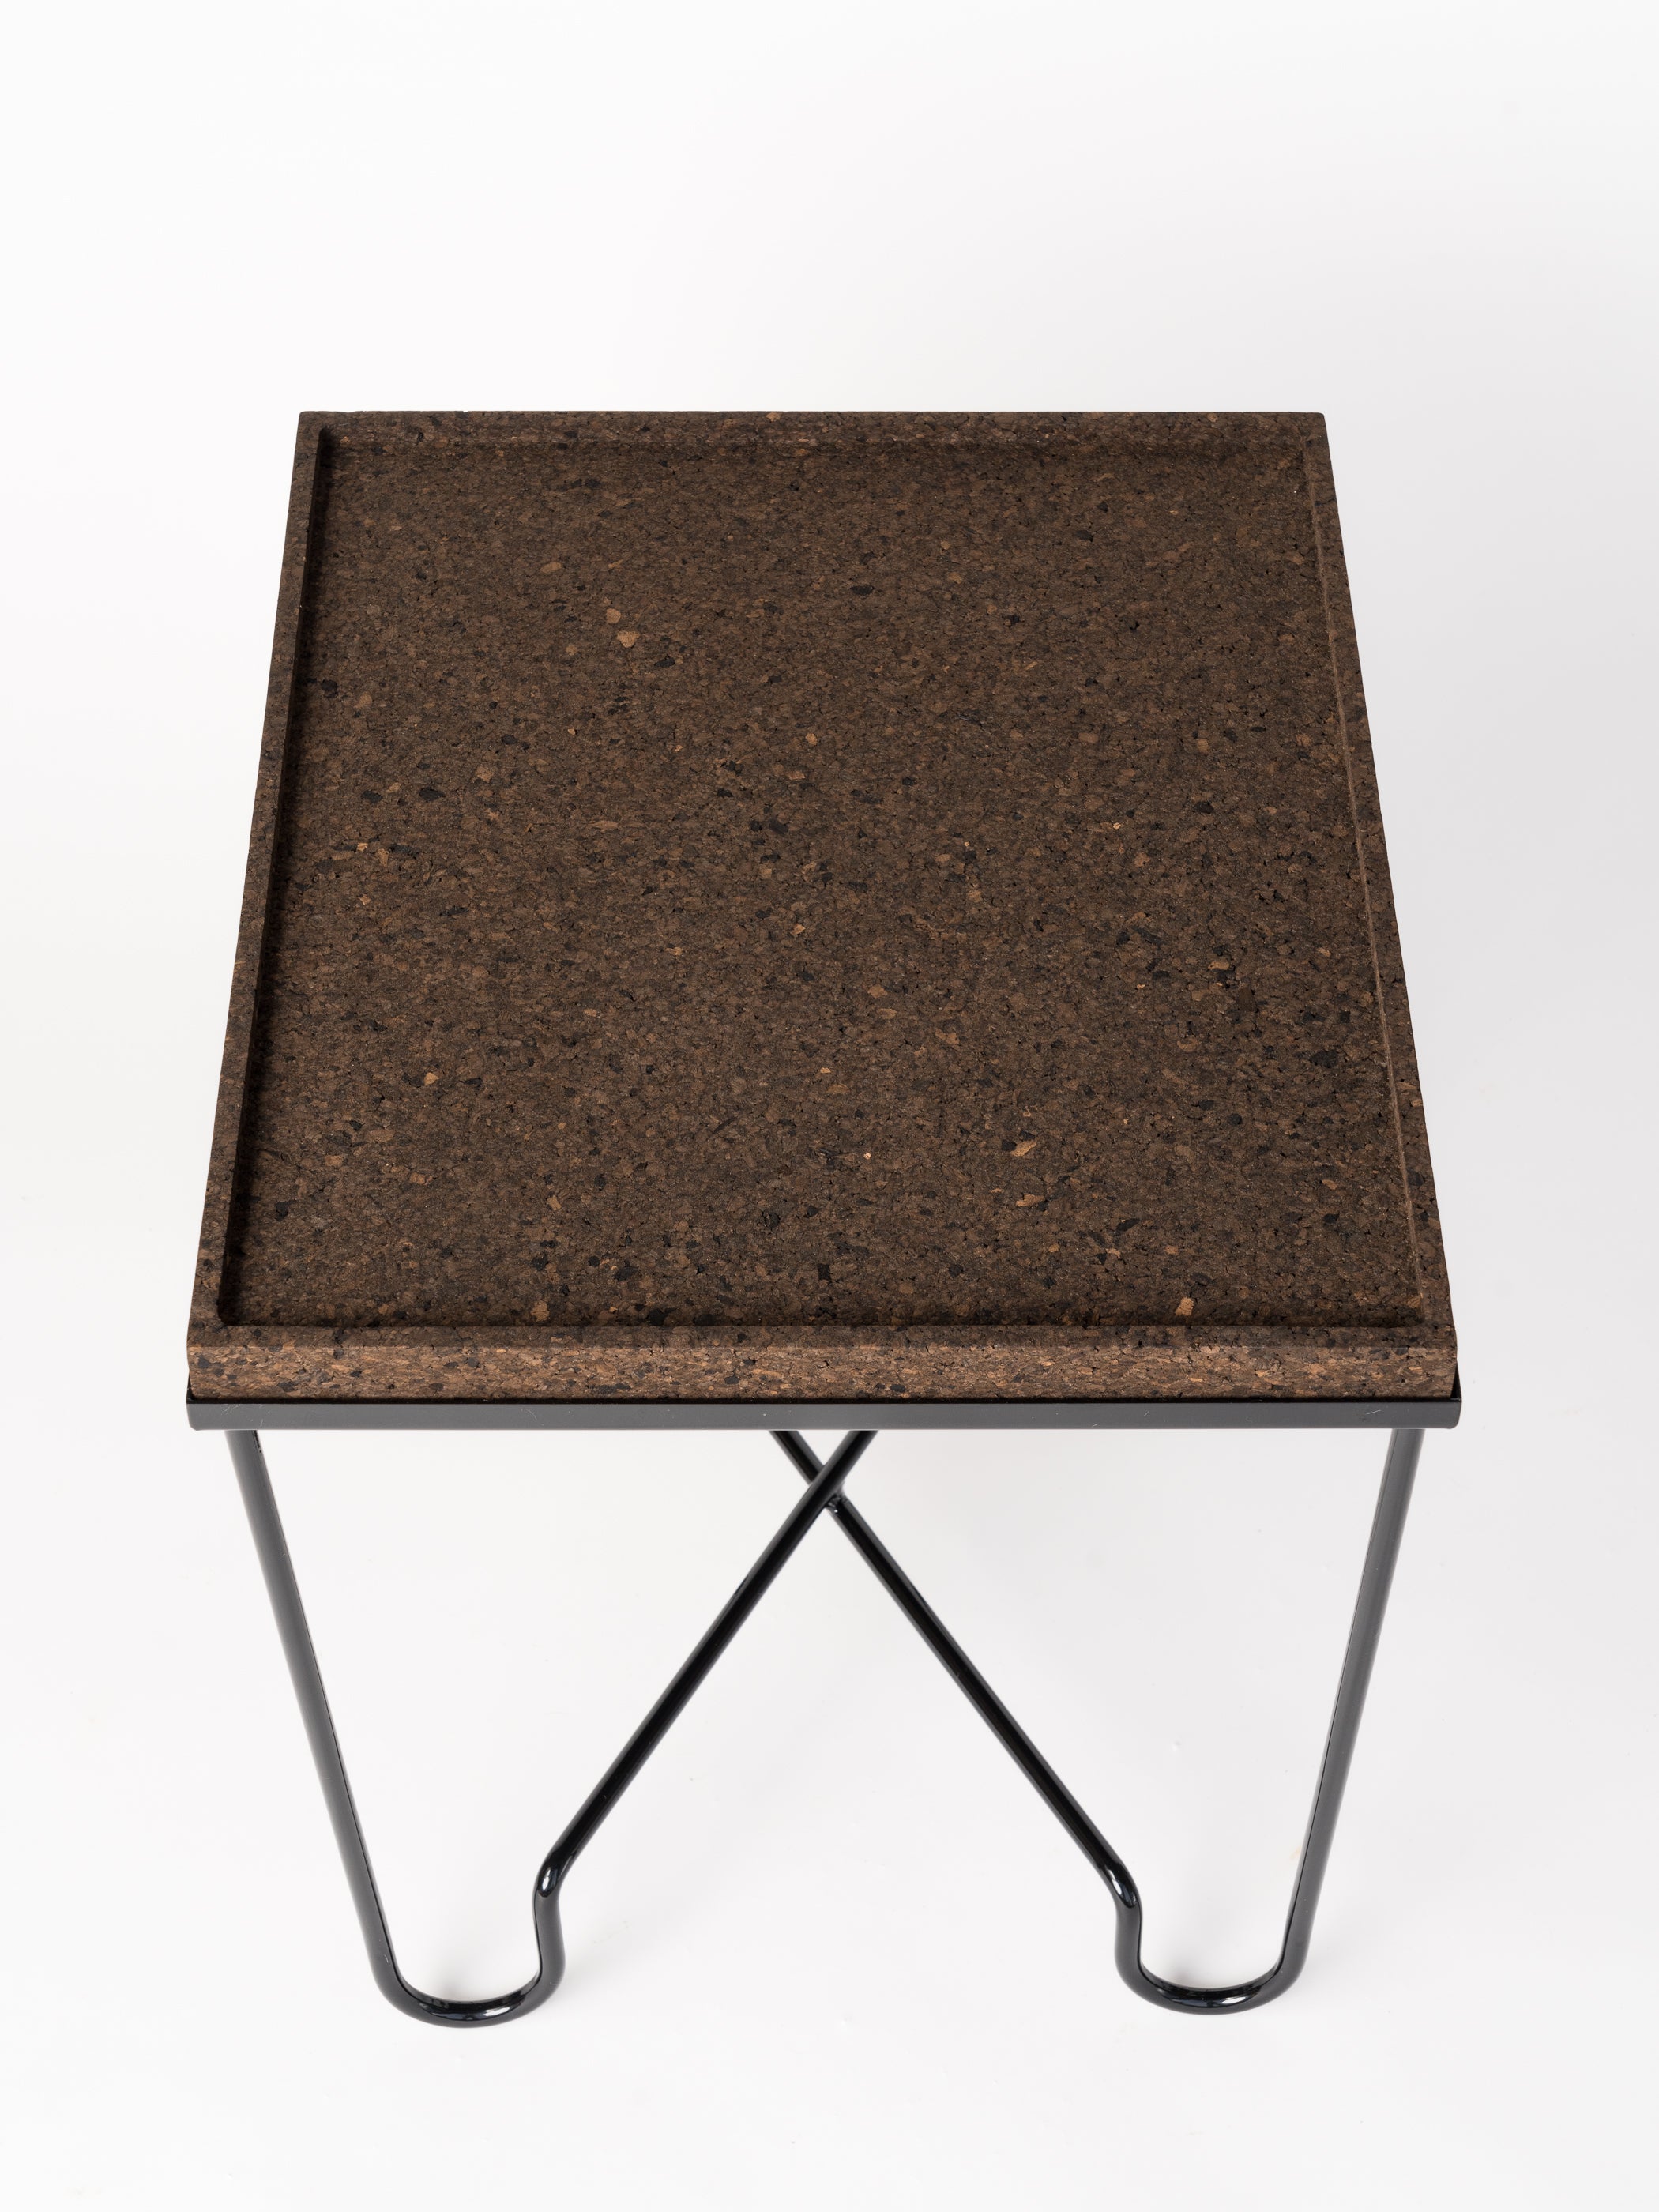 "Aronde" Black Lacquered Steel Side Table with Burnt Cork Top